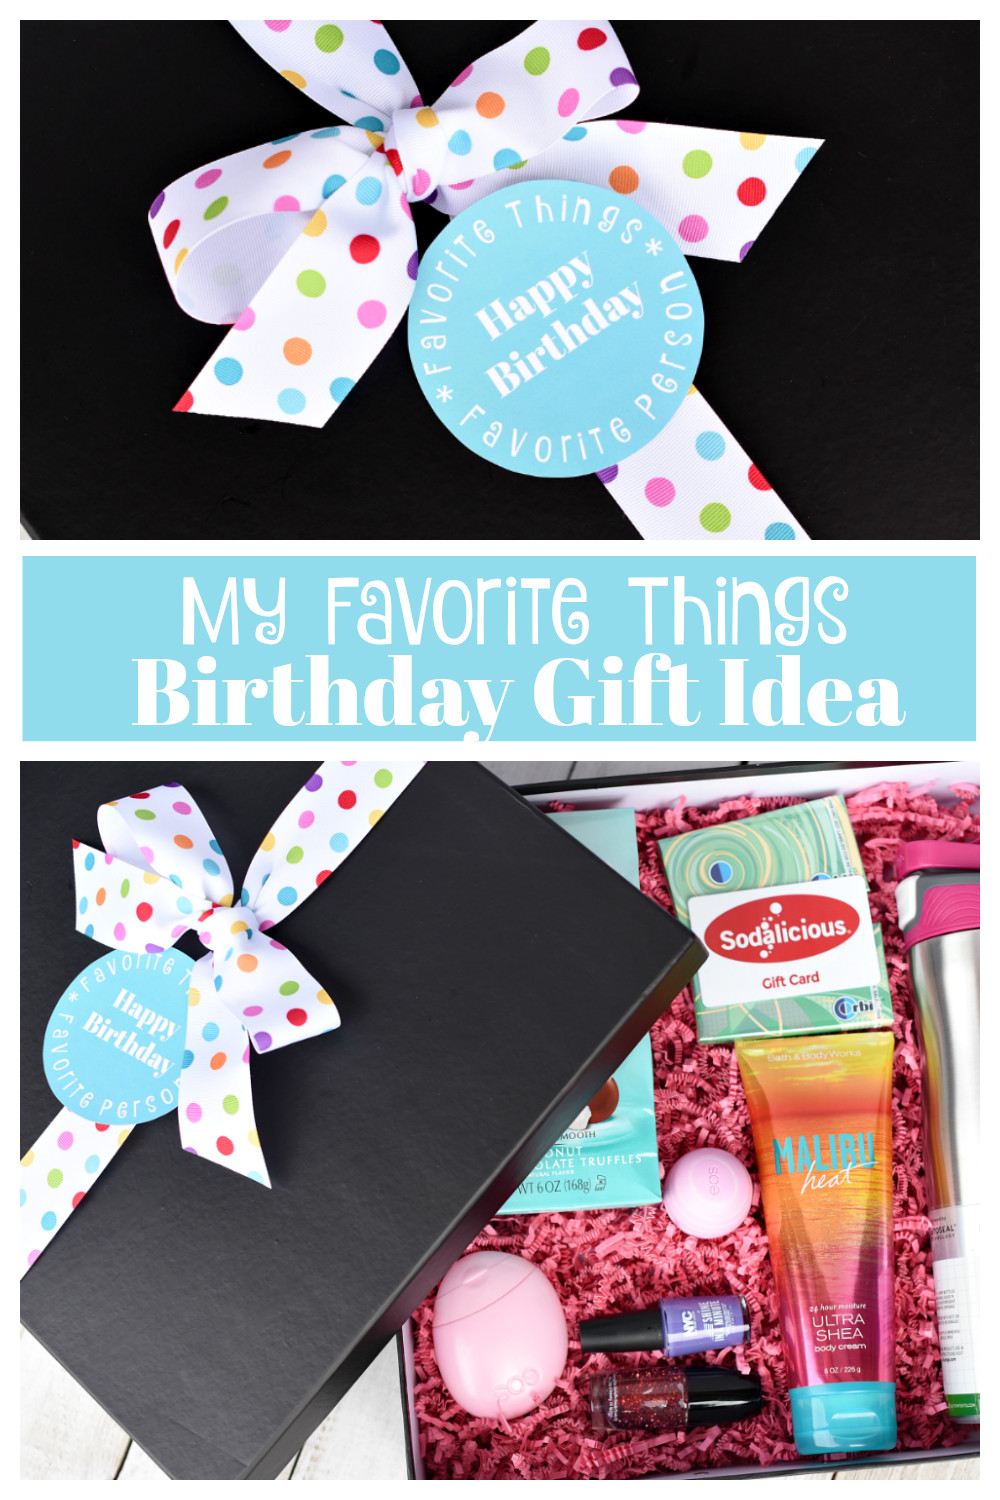 Best Friend Gifts For Birthday
 My Favorite Things Birthday Gifts for Your Best Friend